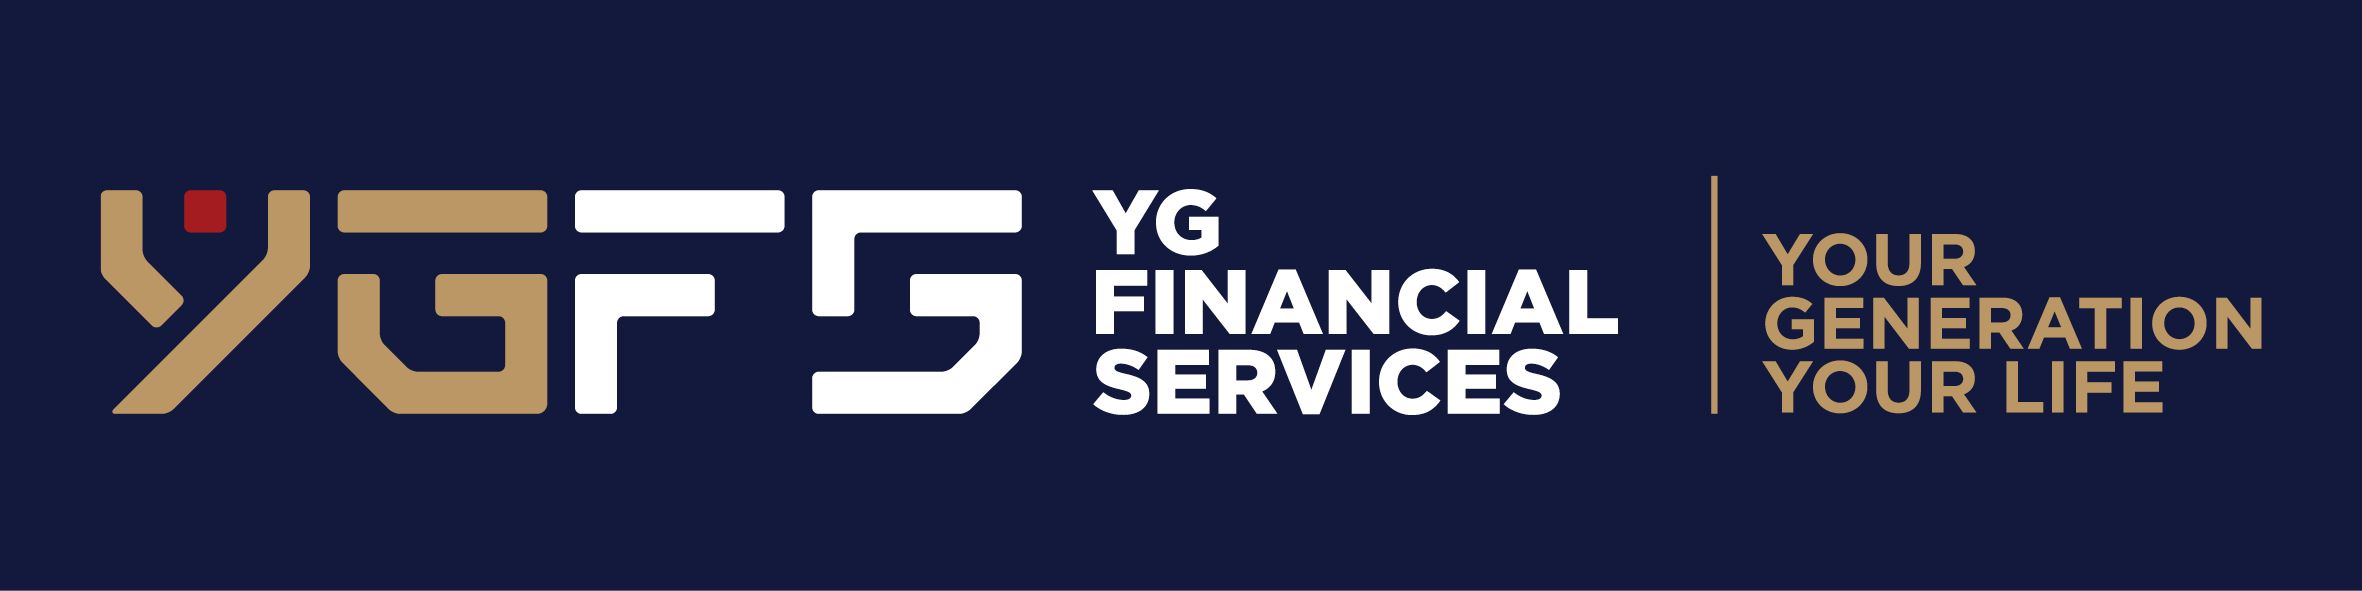 YG Financial Services